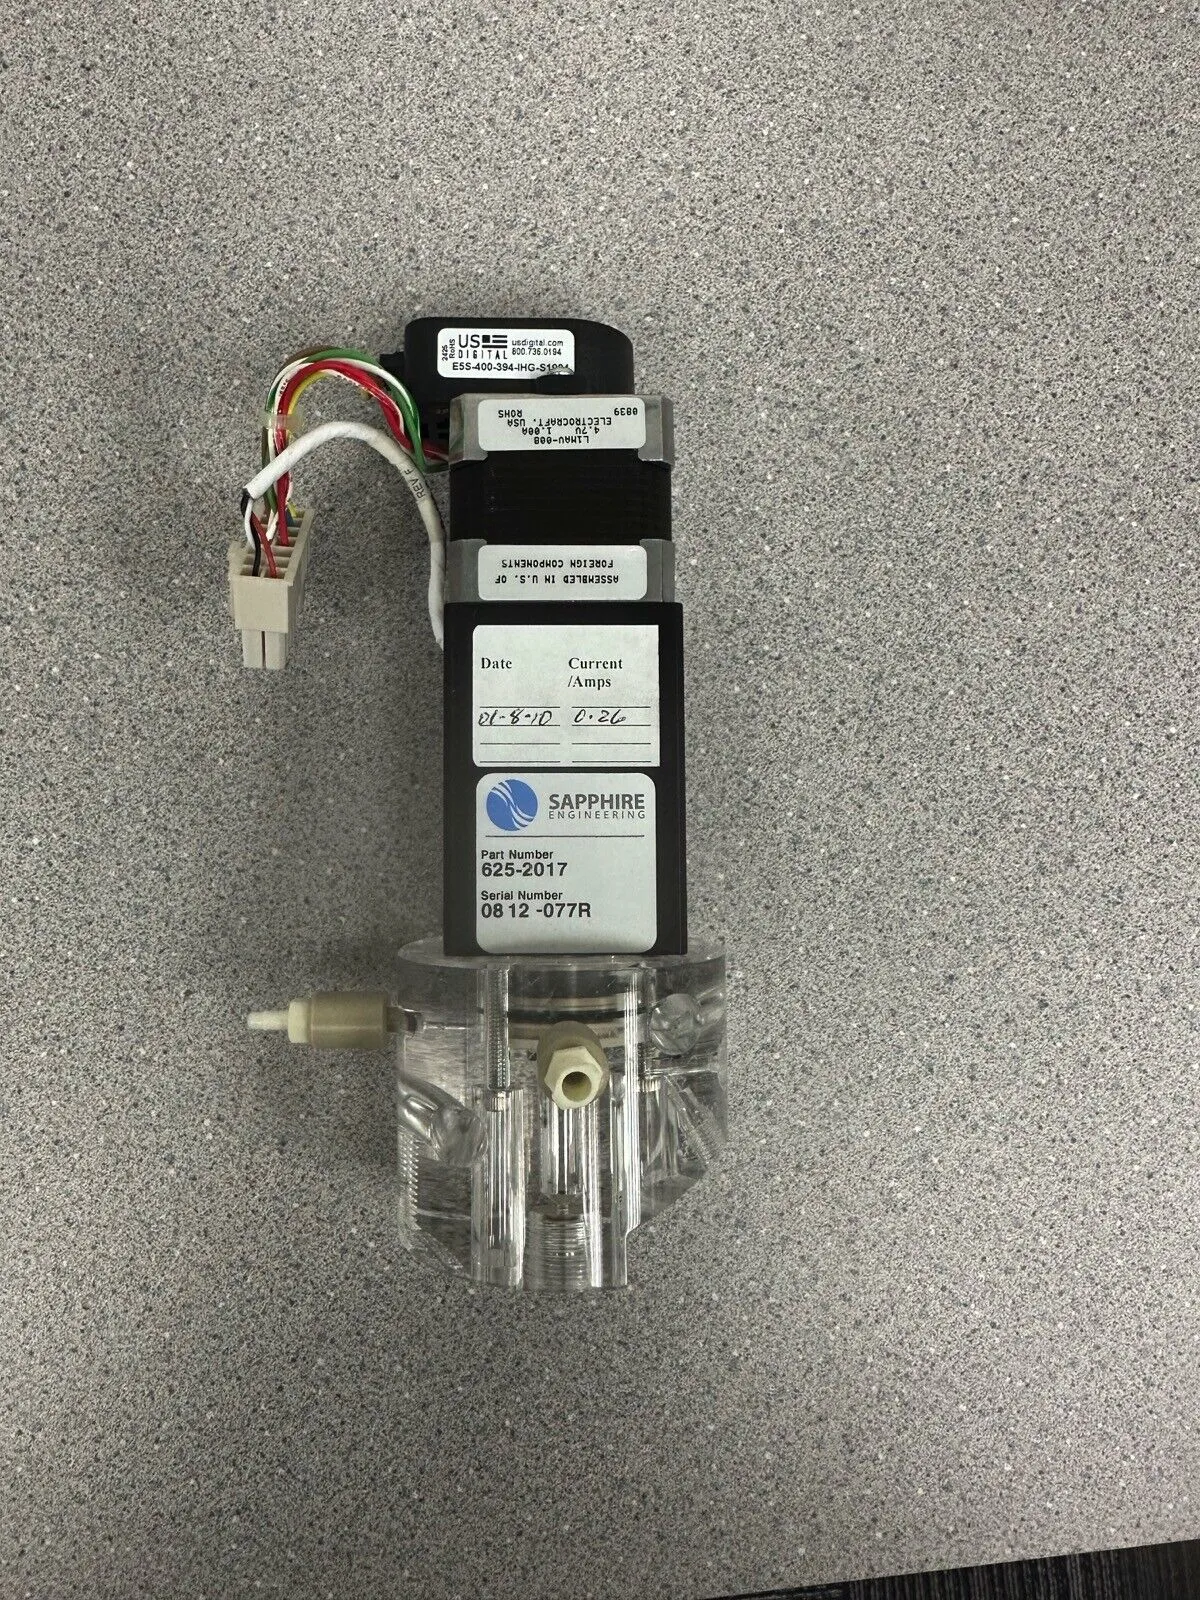 Sapphire Engineering 625-2017 Polymer Pump for ABI 3730 and 3730xl